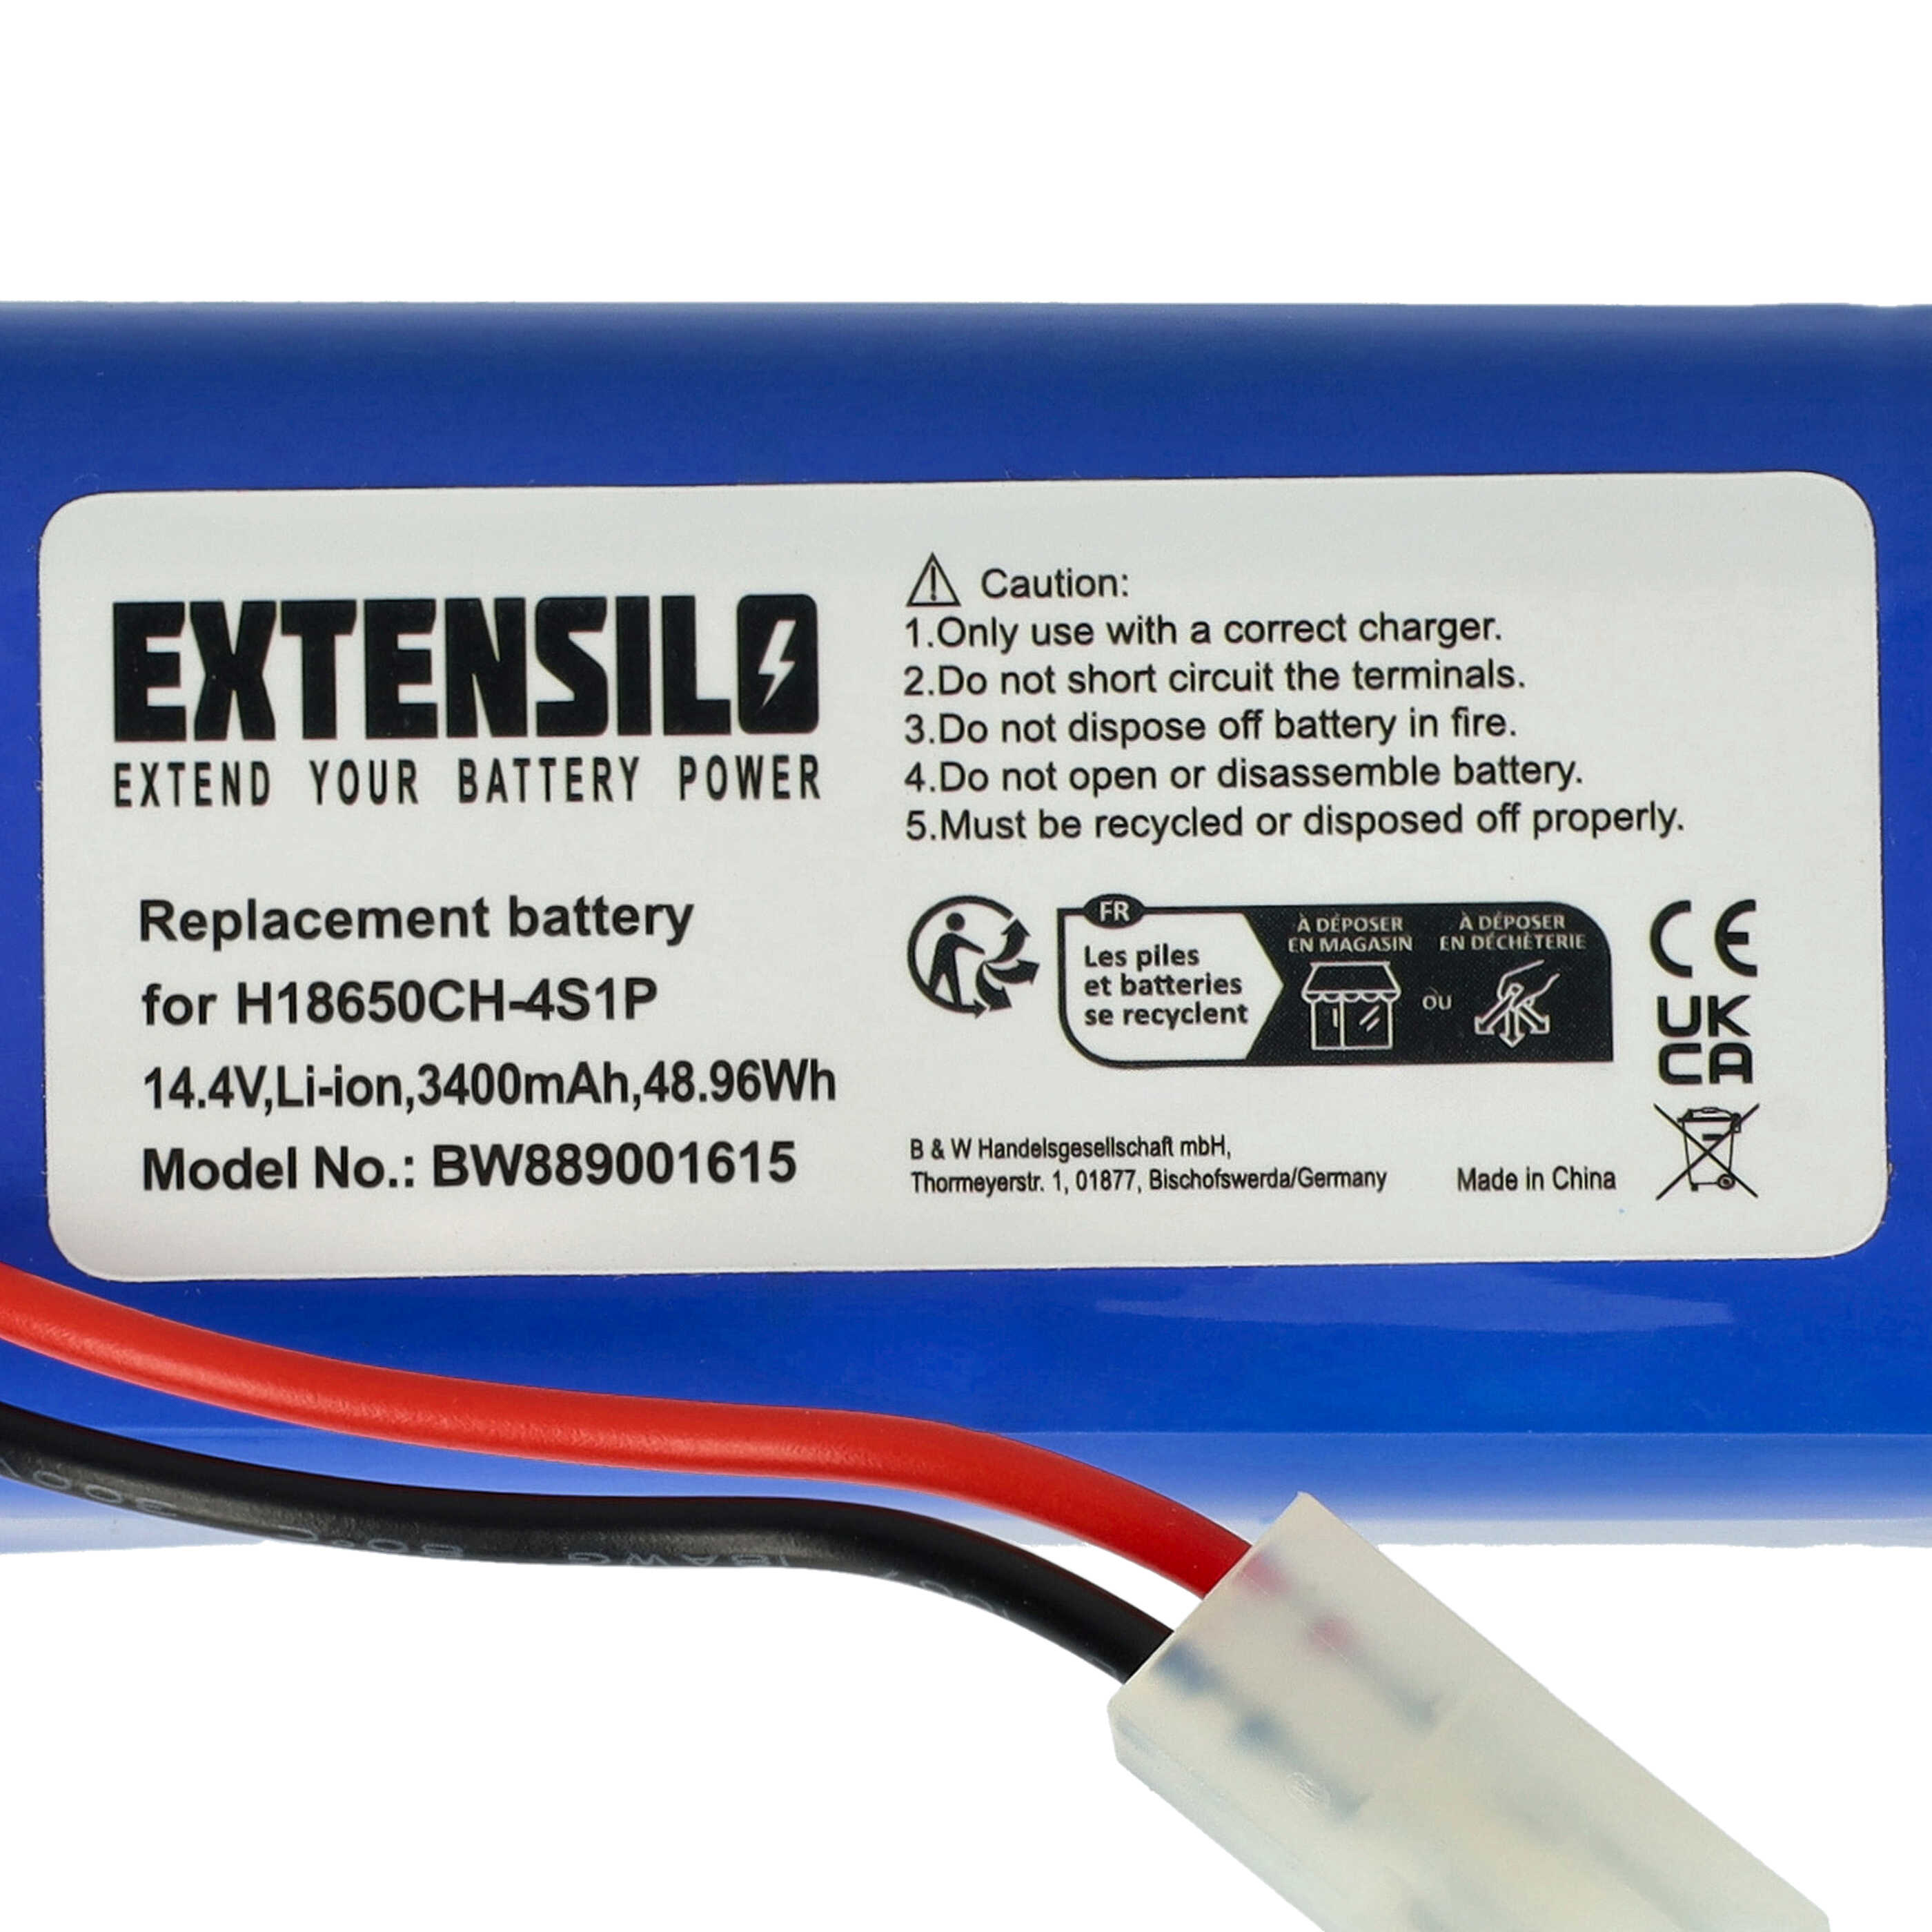 Battery Replacement for Xiaomi H18650CH-4S1P for - 3400mAh, 14.4V, Li-Ion